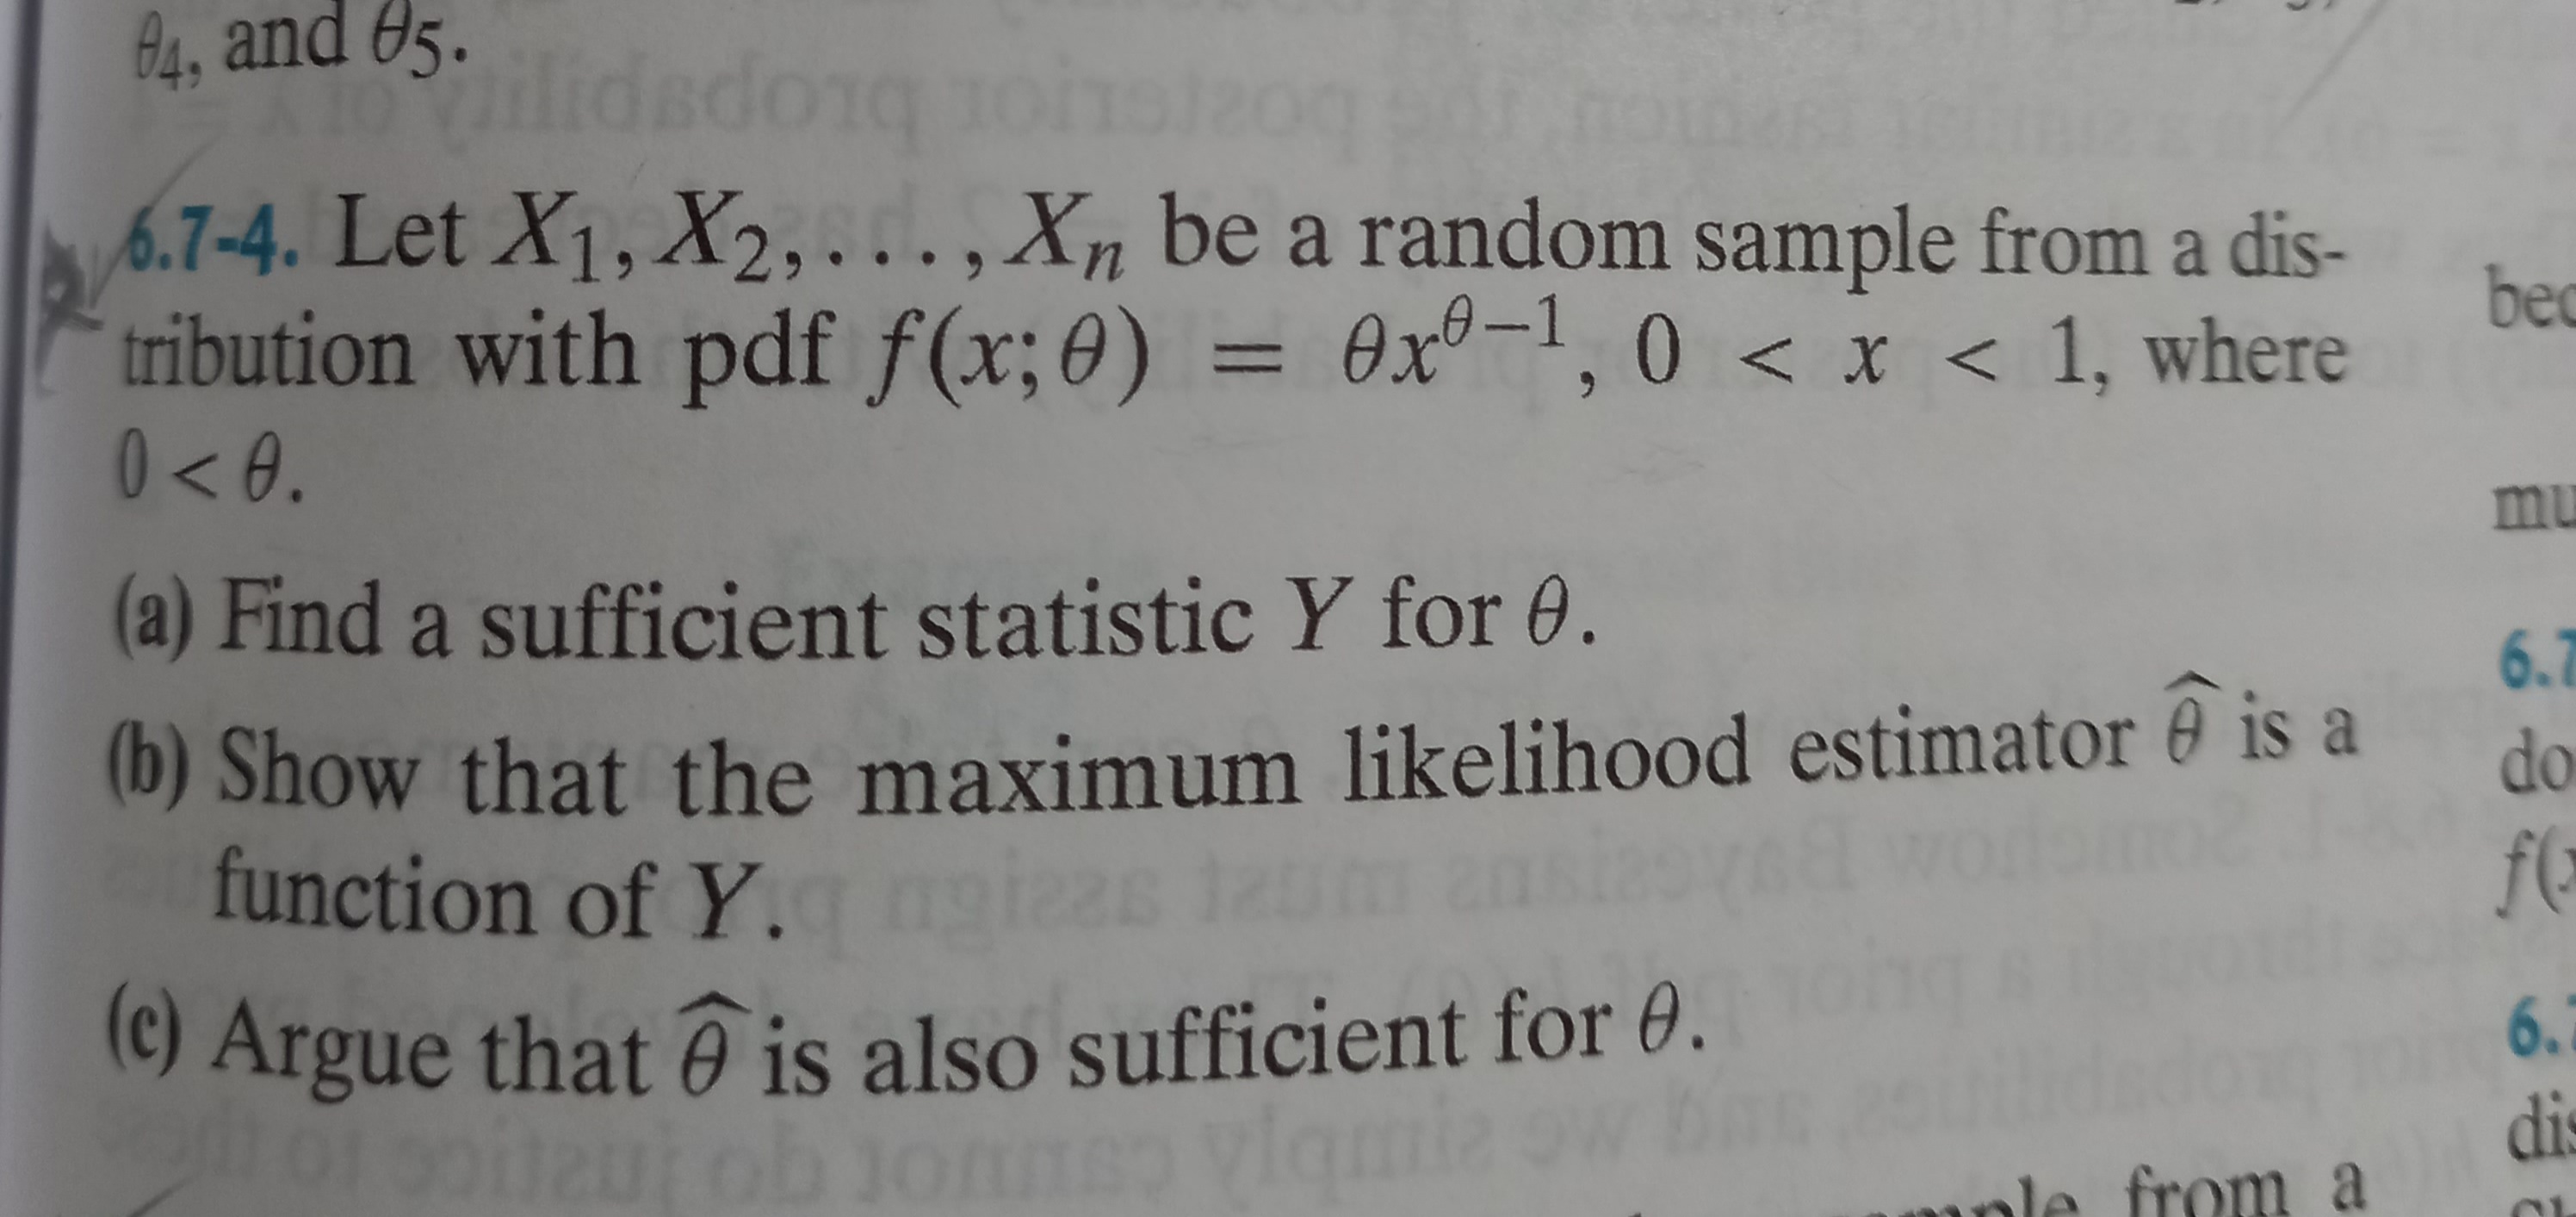 6.7-4. Let X1, X2,. , Xn be a random sample from a dis-
tribution with pdf f(x; 0) = 0xº-1, 0 < x < 1, where
0 < 0.
(a) Find a sufficient statistic Y for 0.
